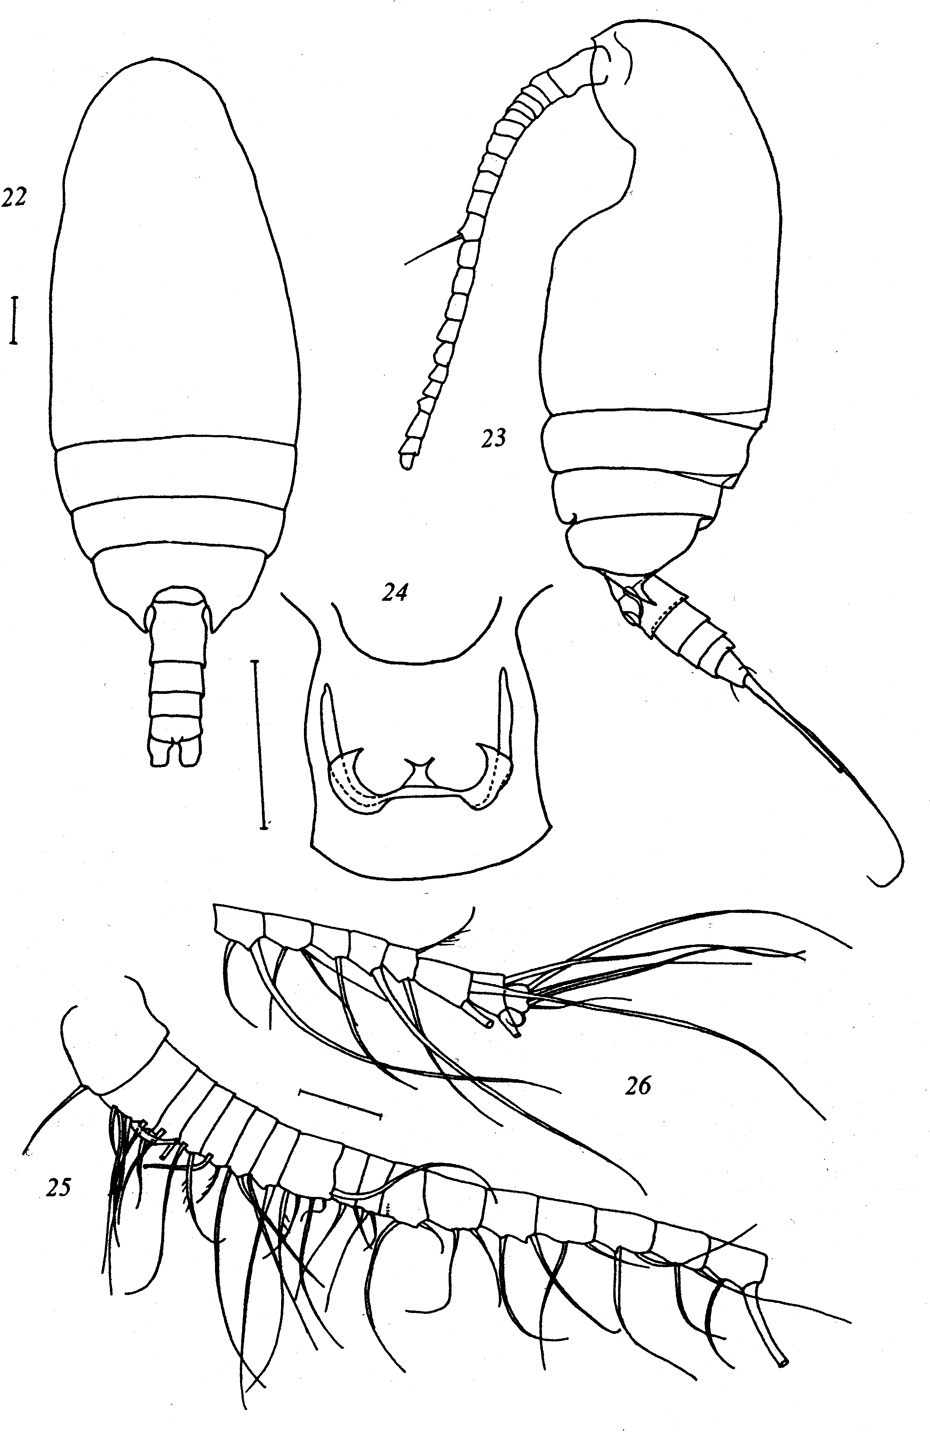 Species Paracomantenna minor - Plate 4 of morphological figures